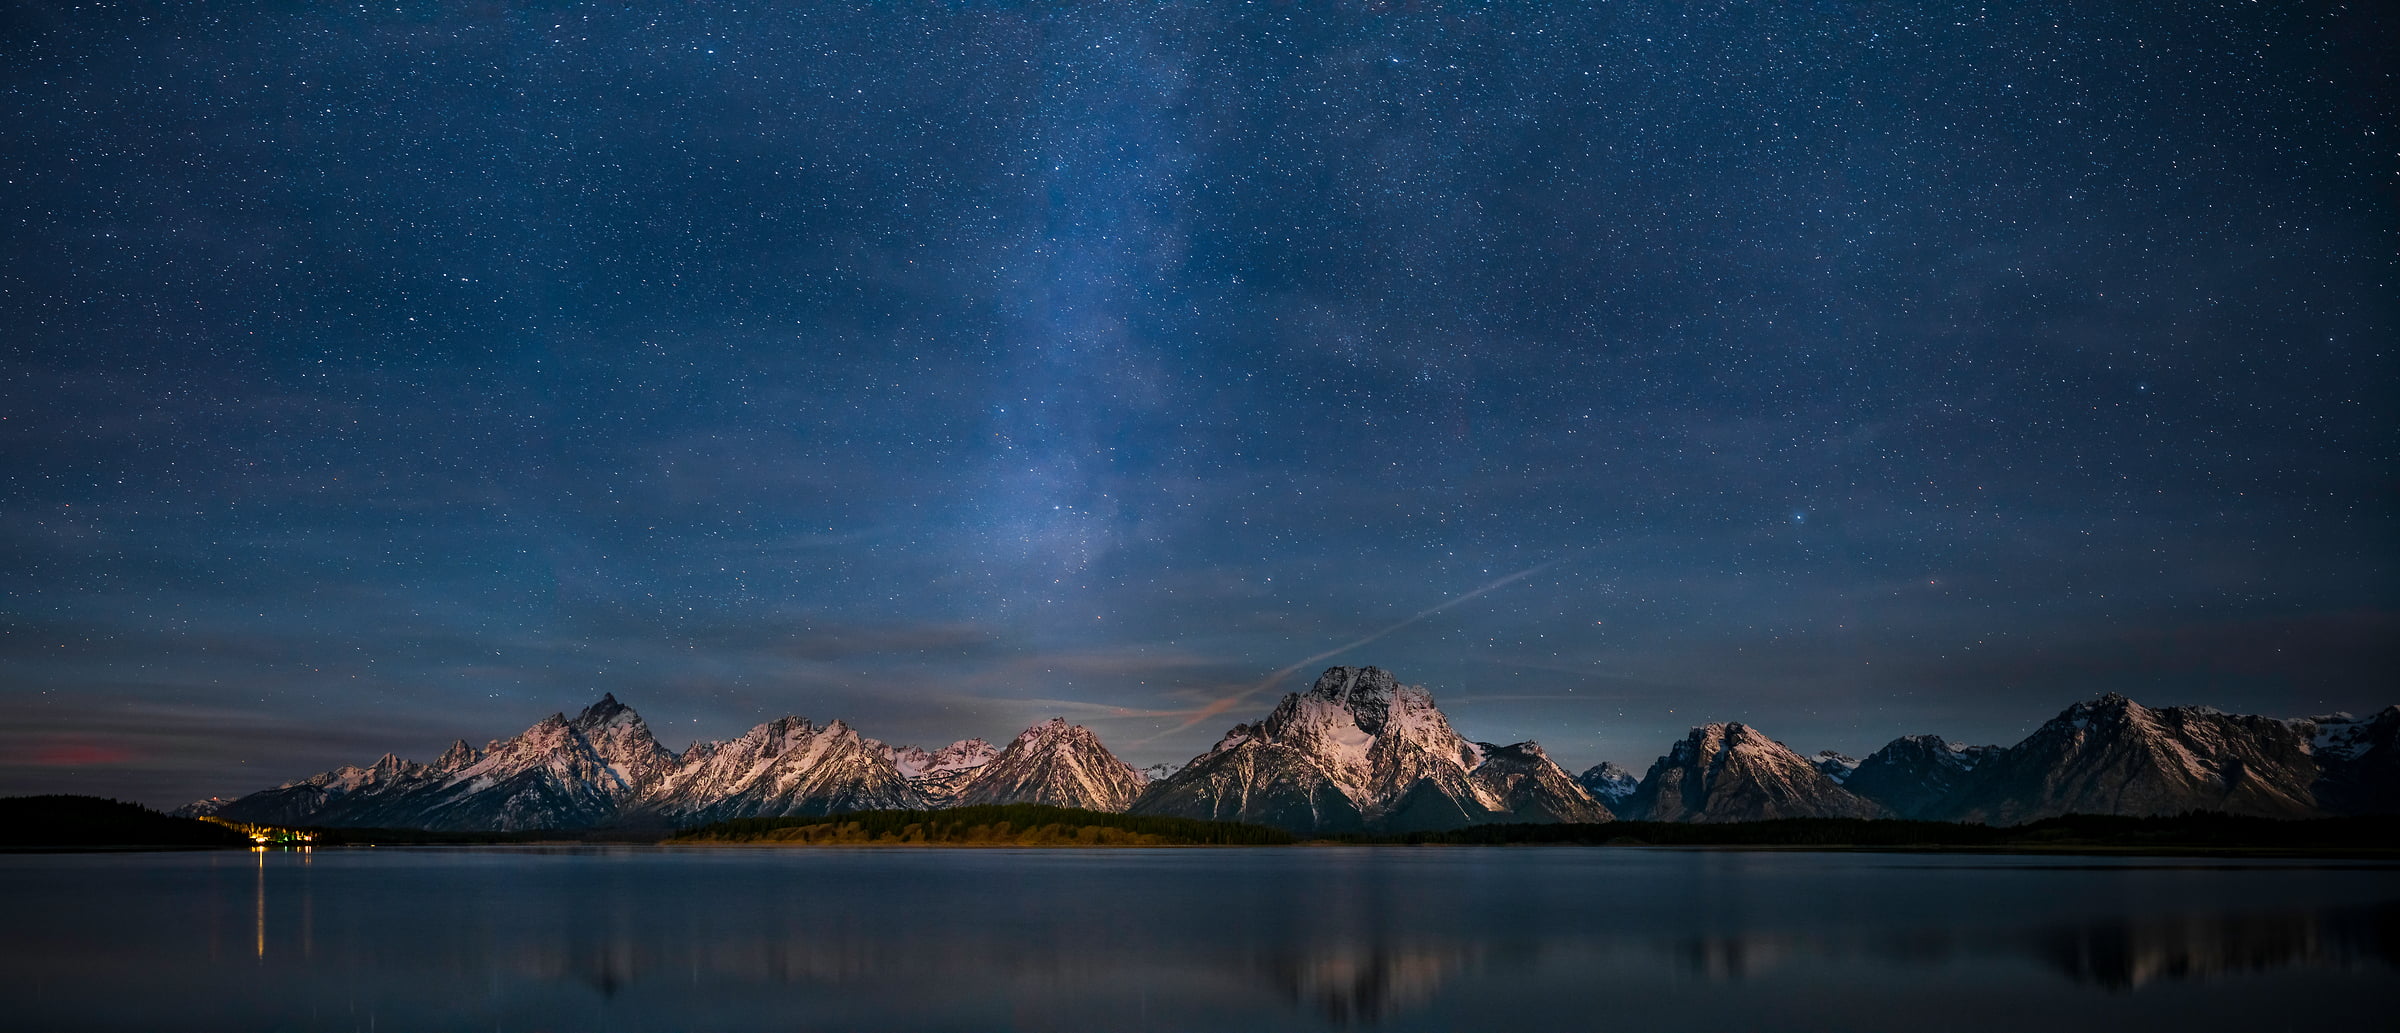 102 megapixels! A very high resolution, large-format VAST photo print of the Rocky Mountains at night with stars and the Milky Way; astrophotograph created by Justin Katz in Grand Teton National Park, Wyoming